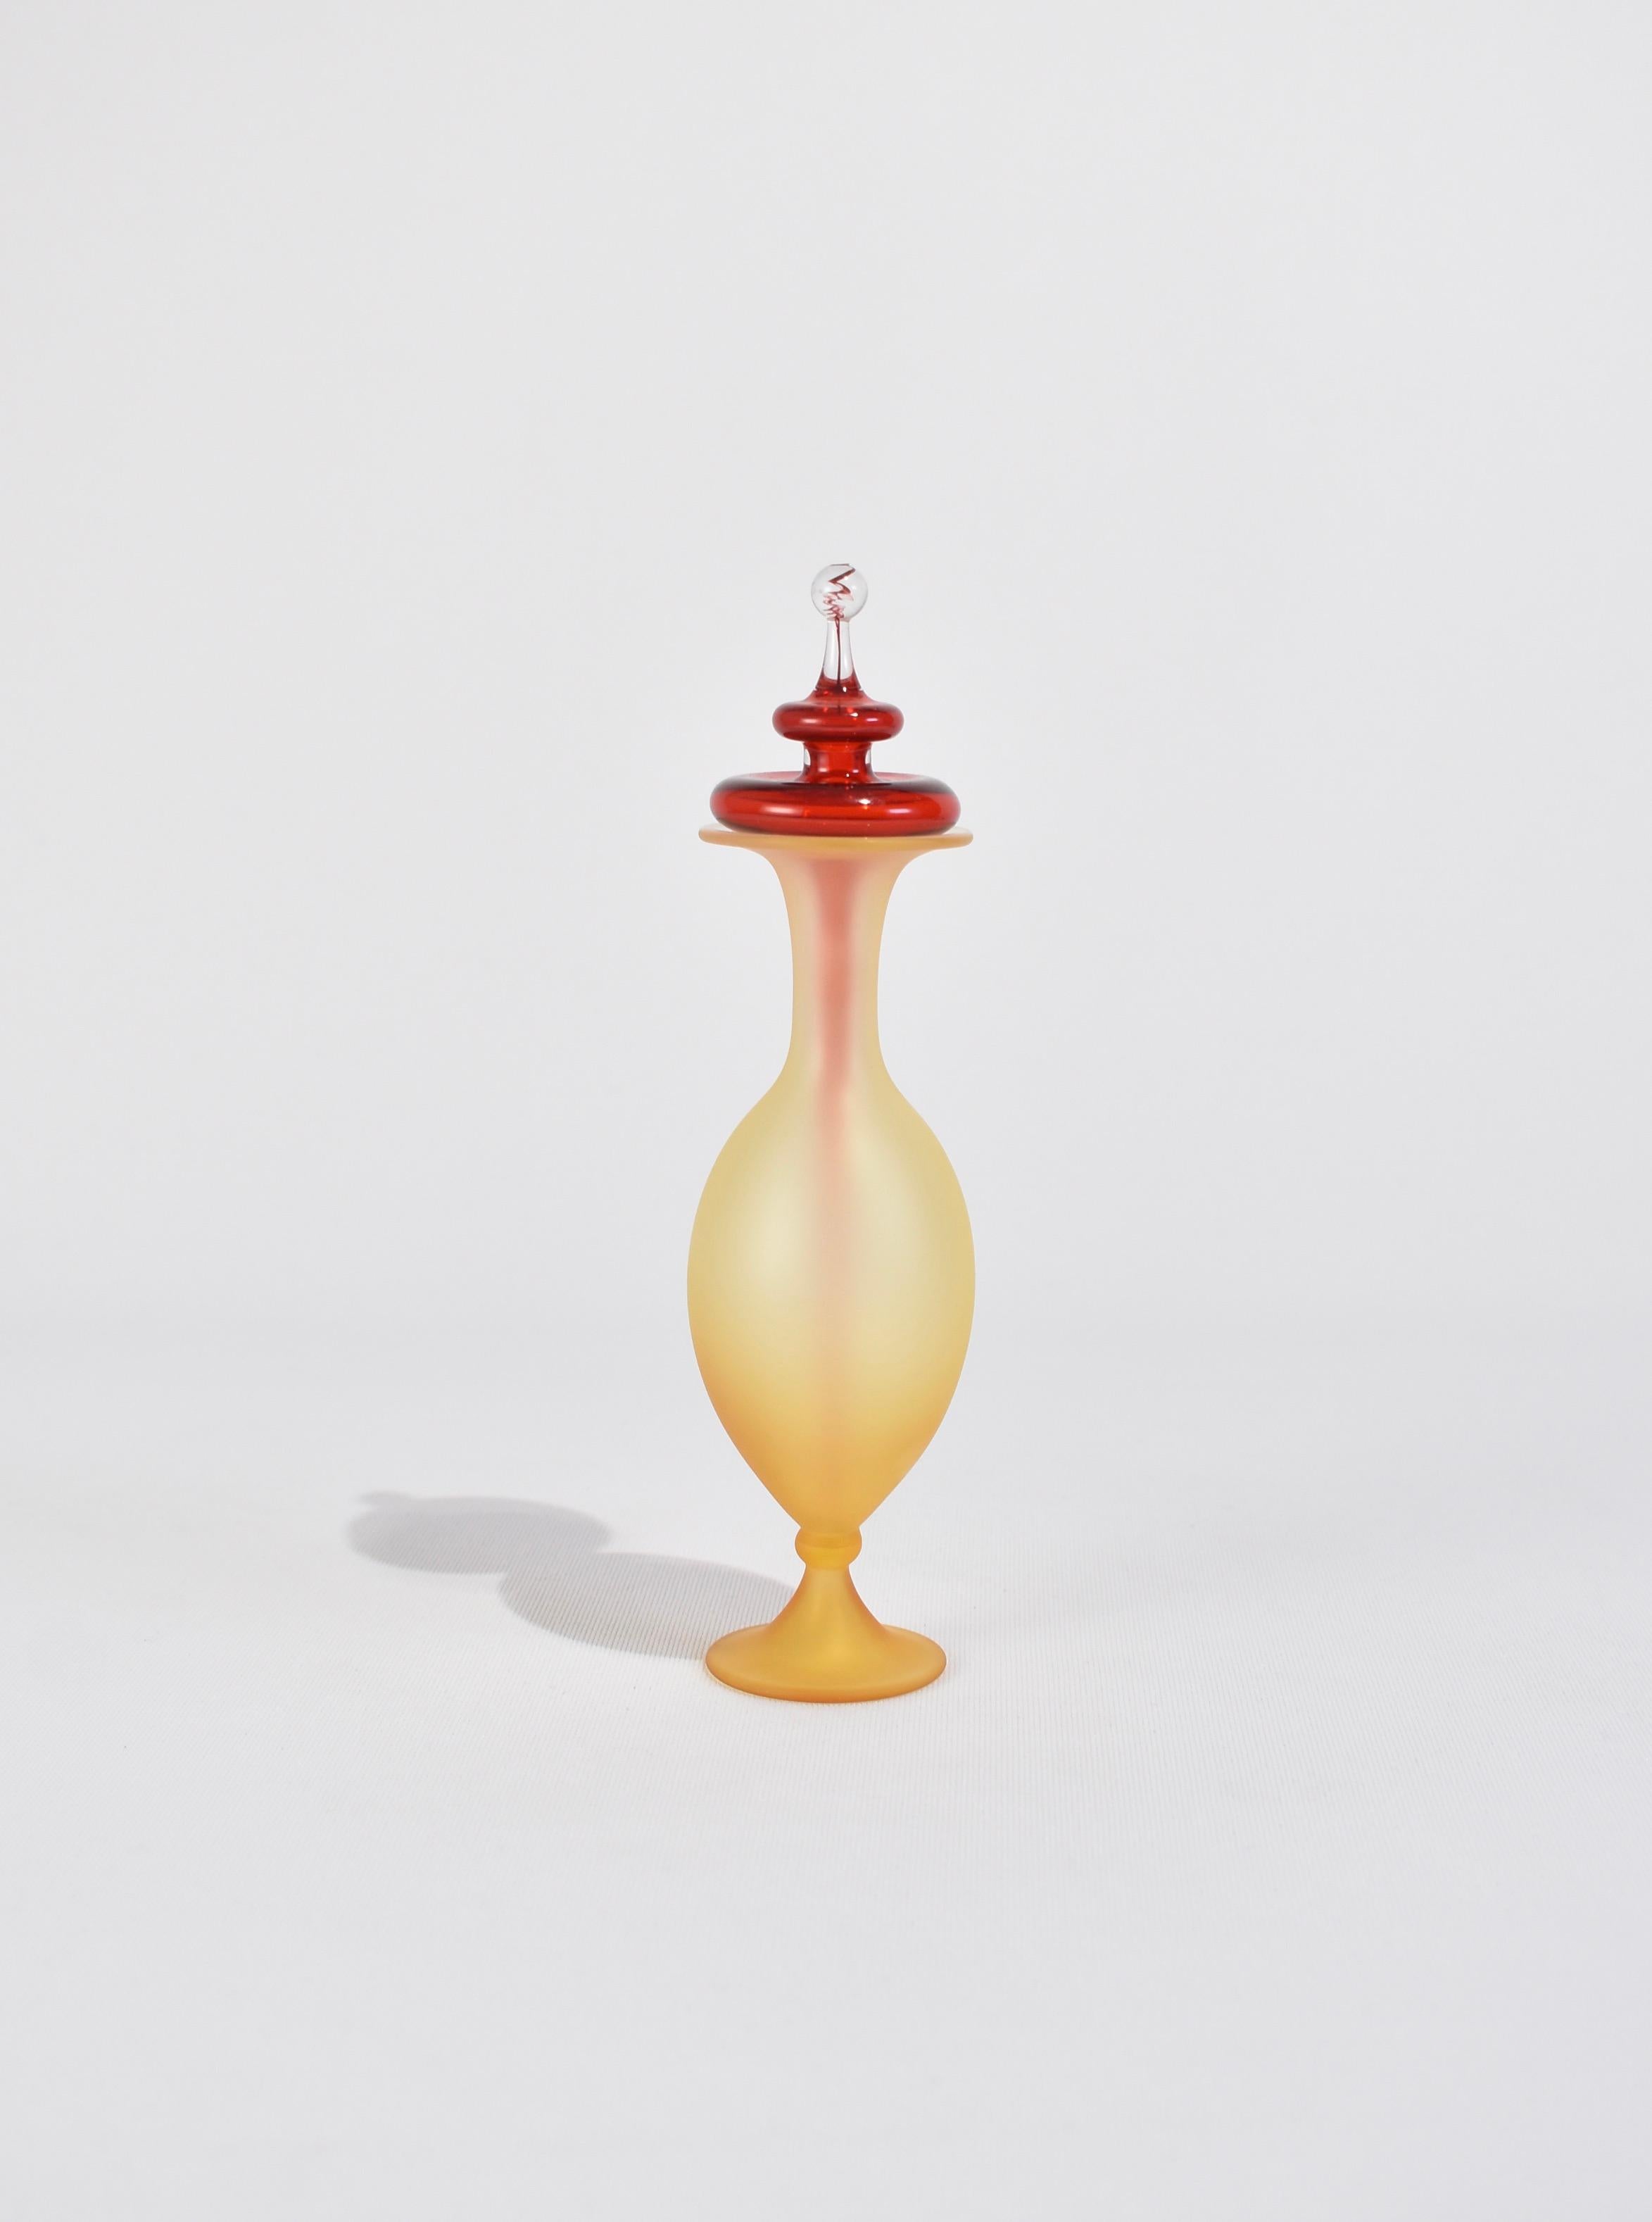 Stunning Vintage perfume bottle in yellow with a satin finish and a sculptural red glass stopper.